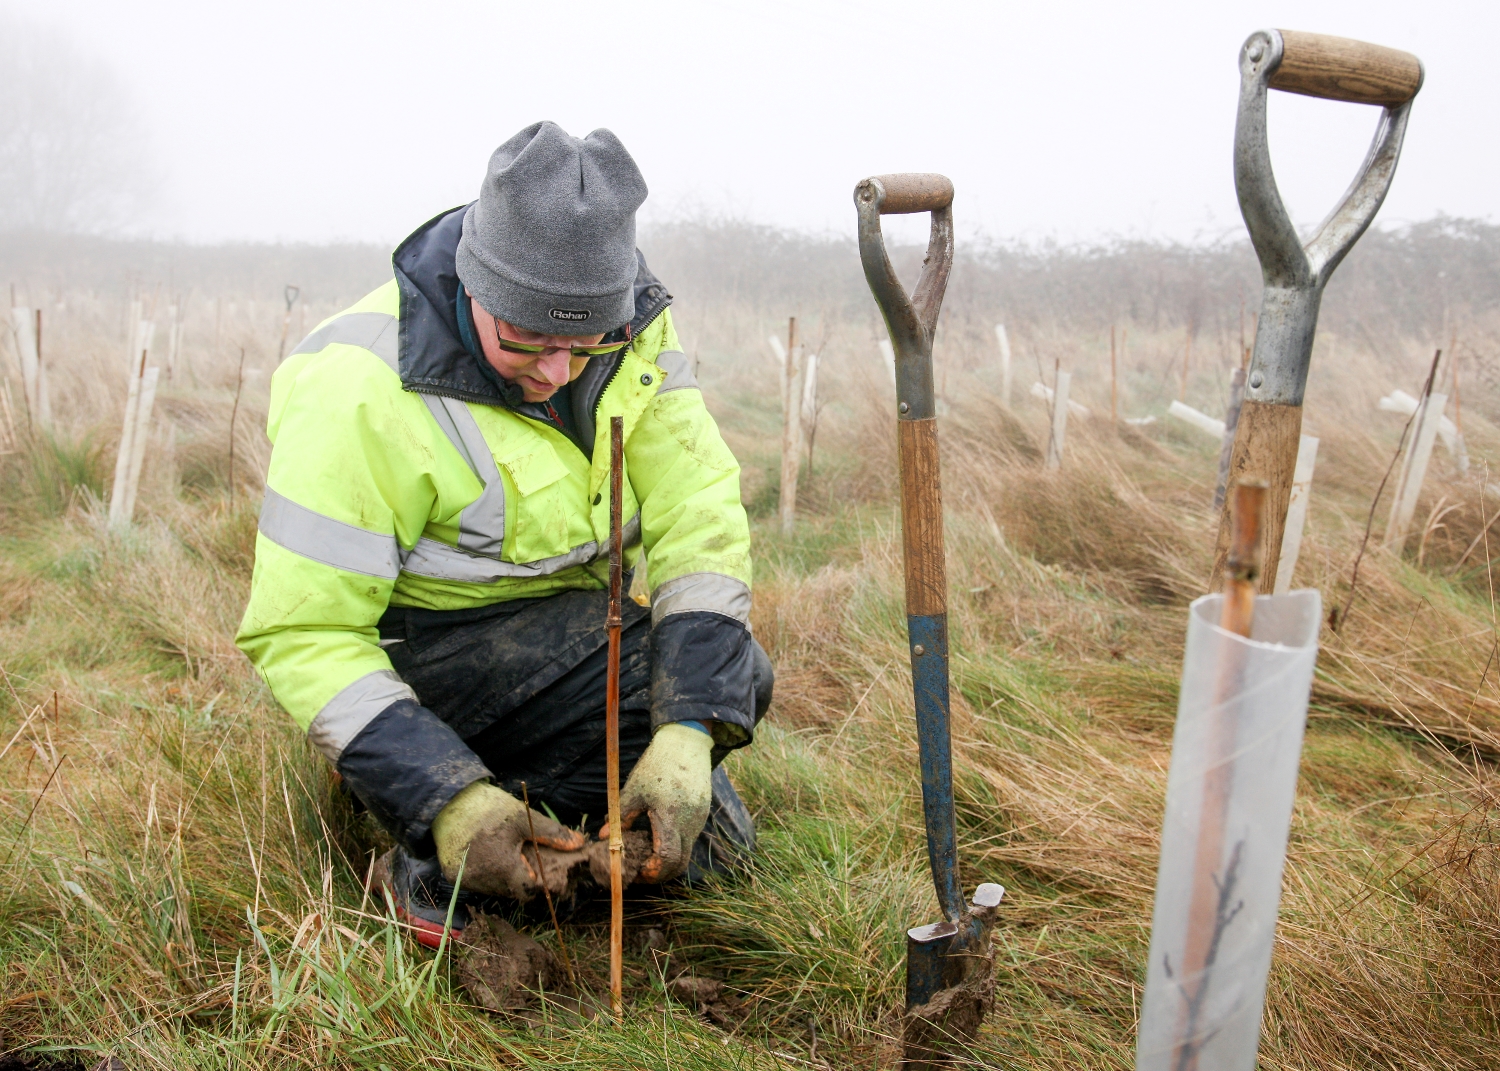 Volunteer wearing a yellow high vis jacket crouching down planting a tree sapling in the ground with a spade next to him on a frosty day 